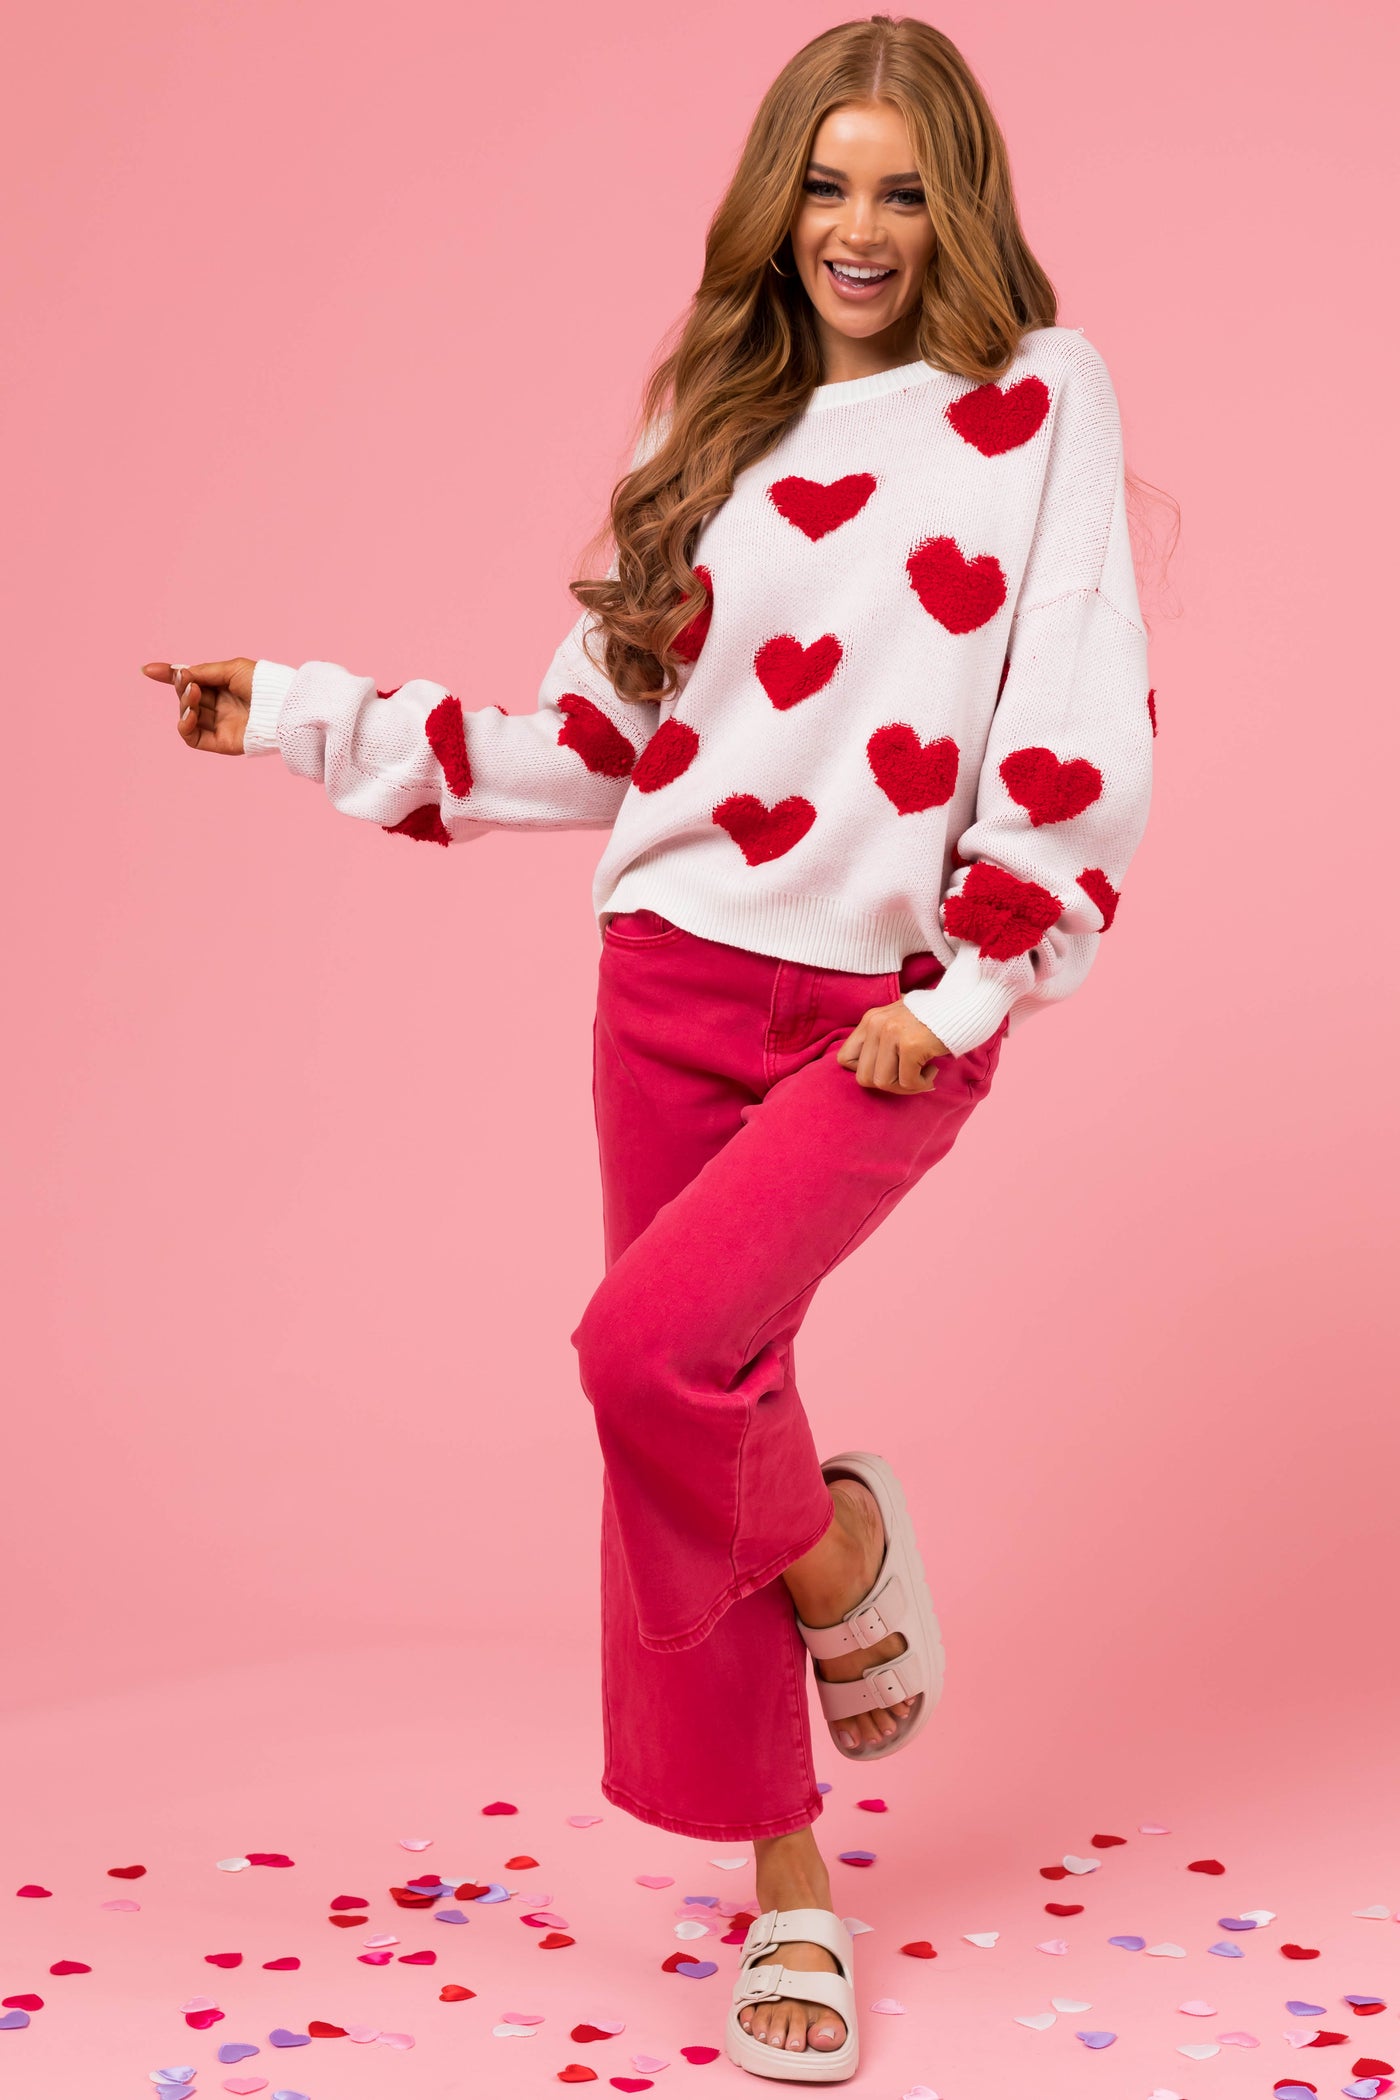 Off White and Cherry Heart Pattern Sweater